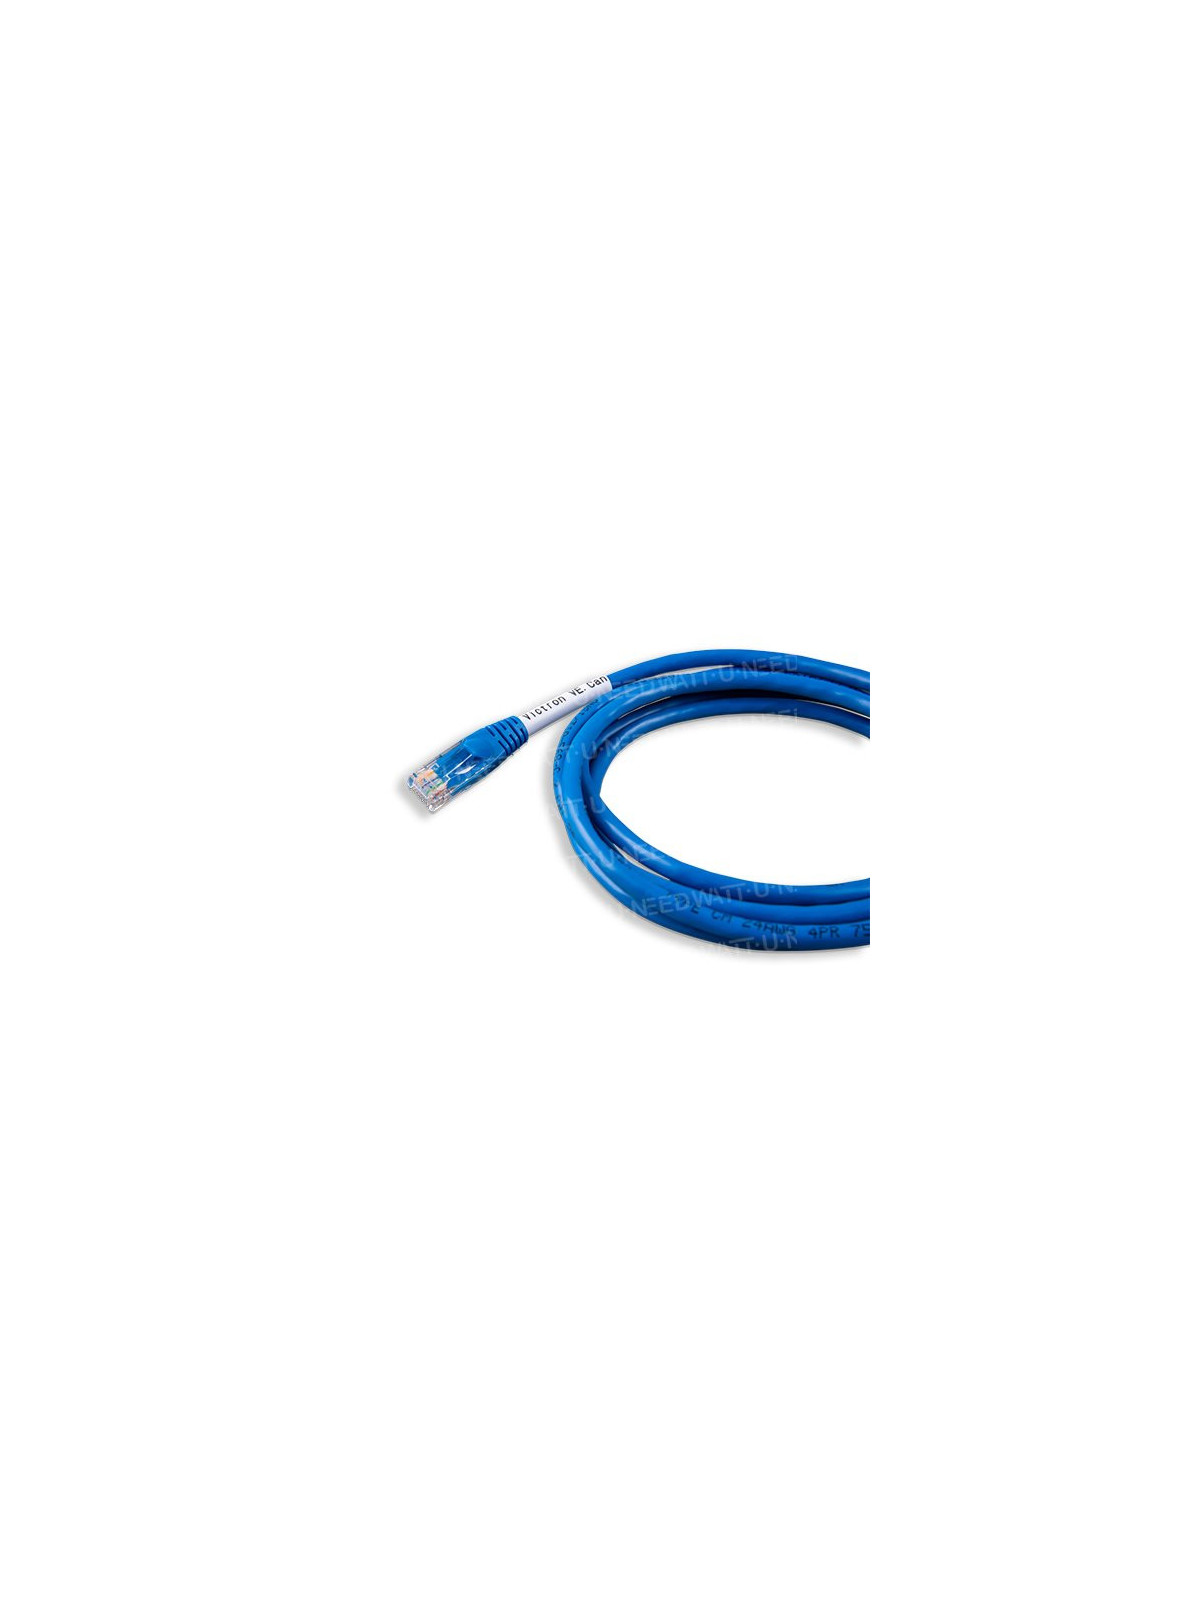 Cable VE.Can a Bus-CAN de BMS